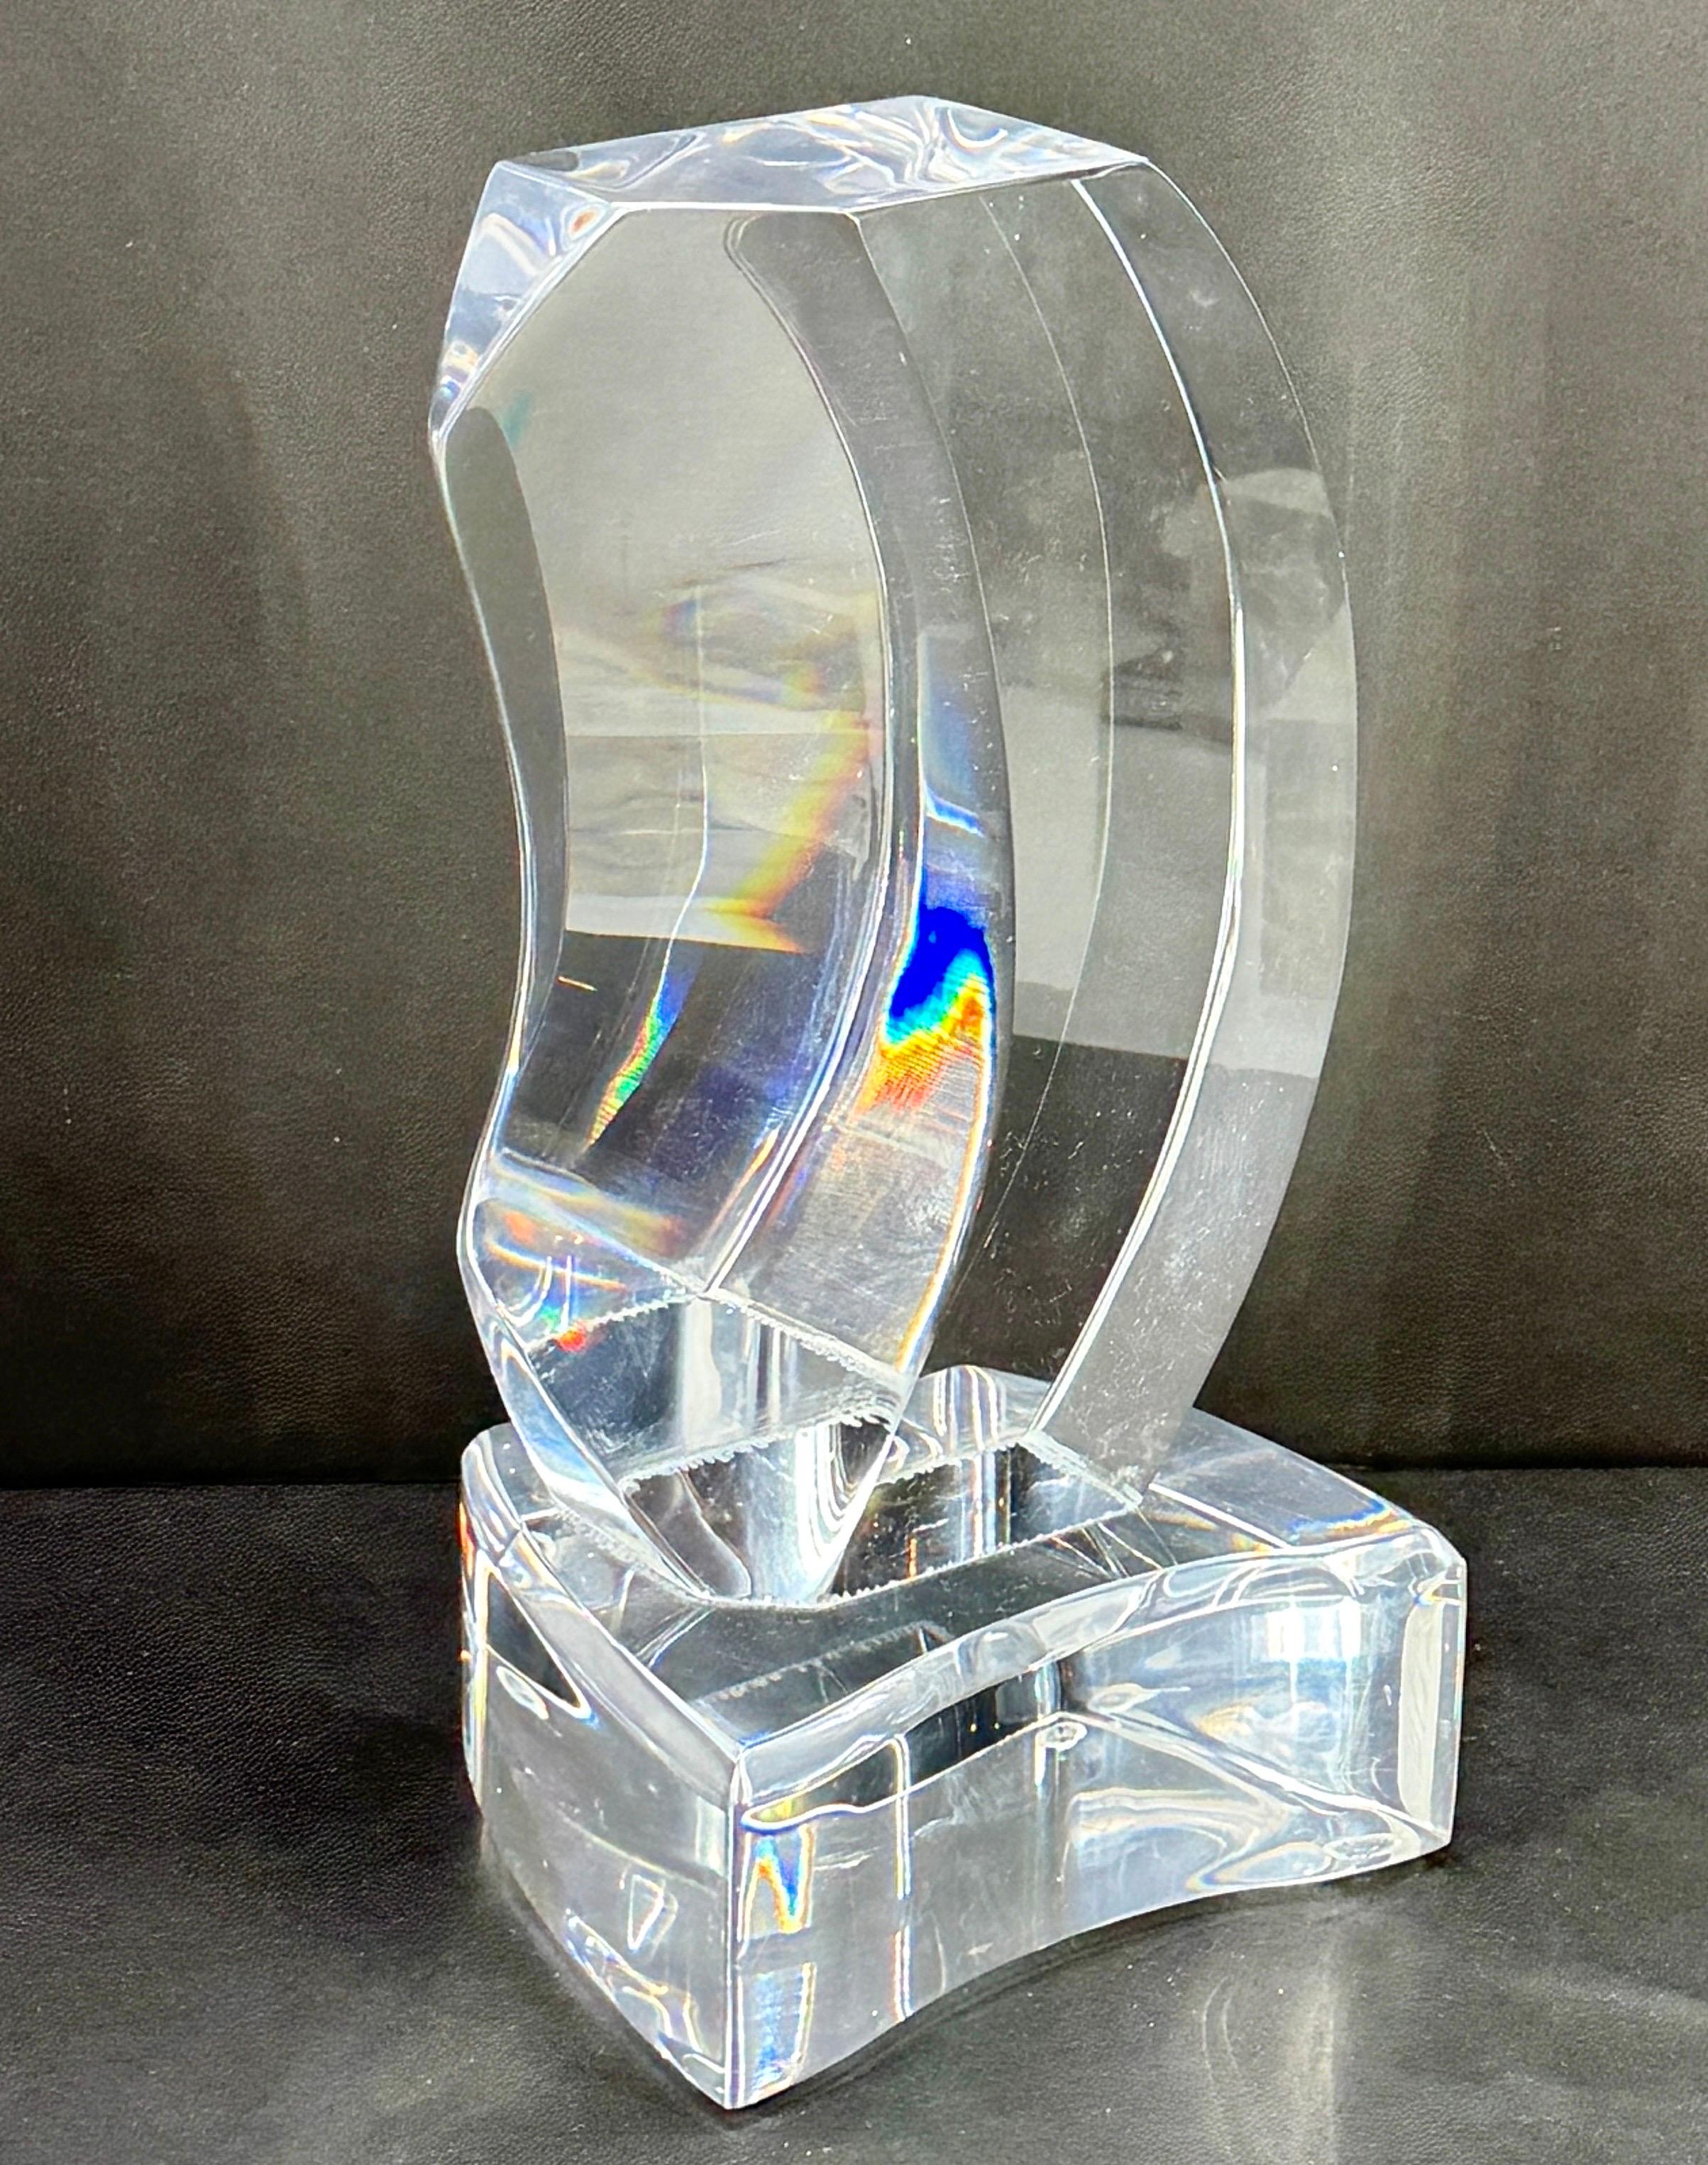 Thich Lucite Abstract Table Sculpture, MCM 1960's

The wonder of a lucite table sculpture never goes away as it seems to defy the laws of the nature, like having an ice sculpture that never melts. This one has clean modern lines and is wonderfully